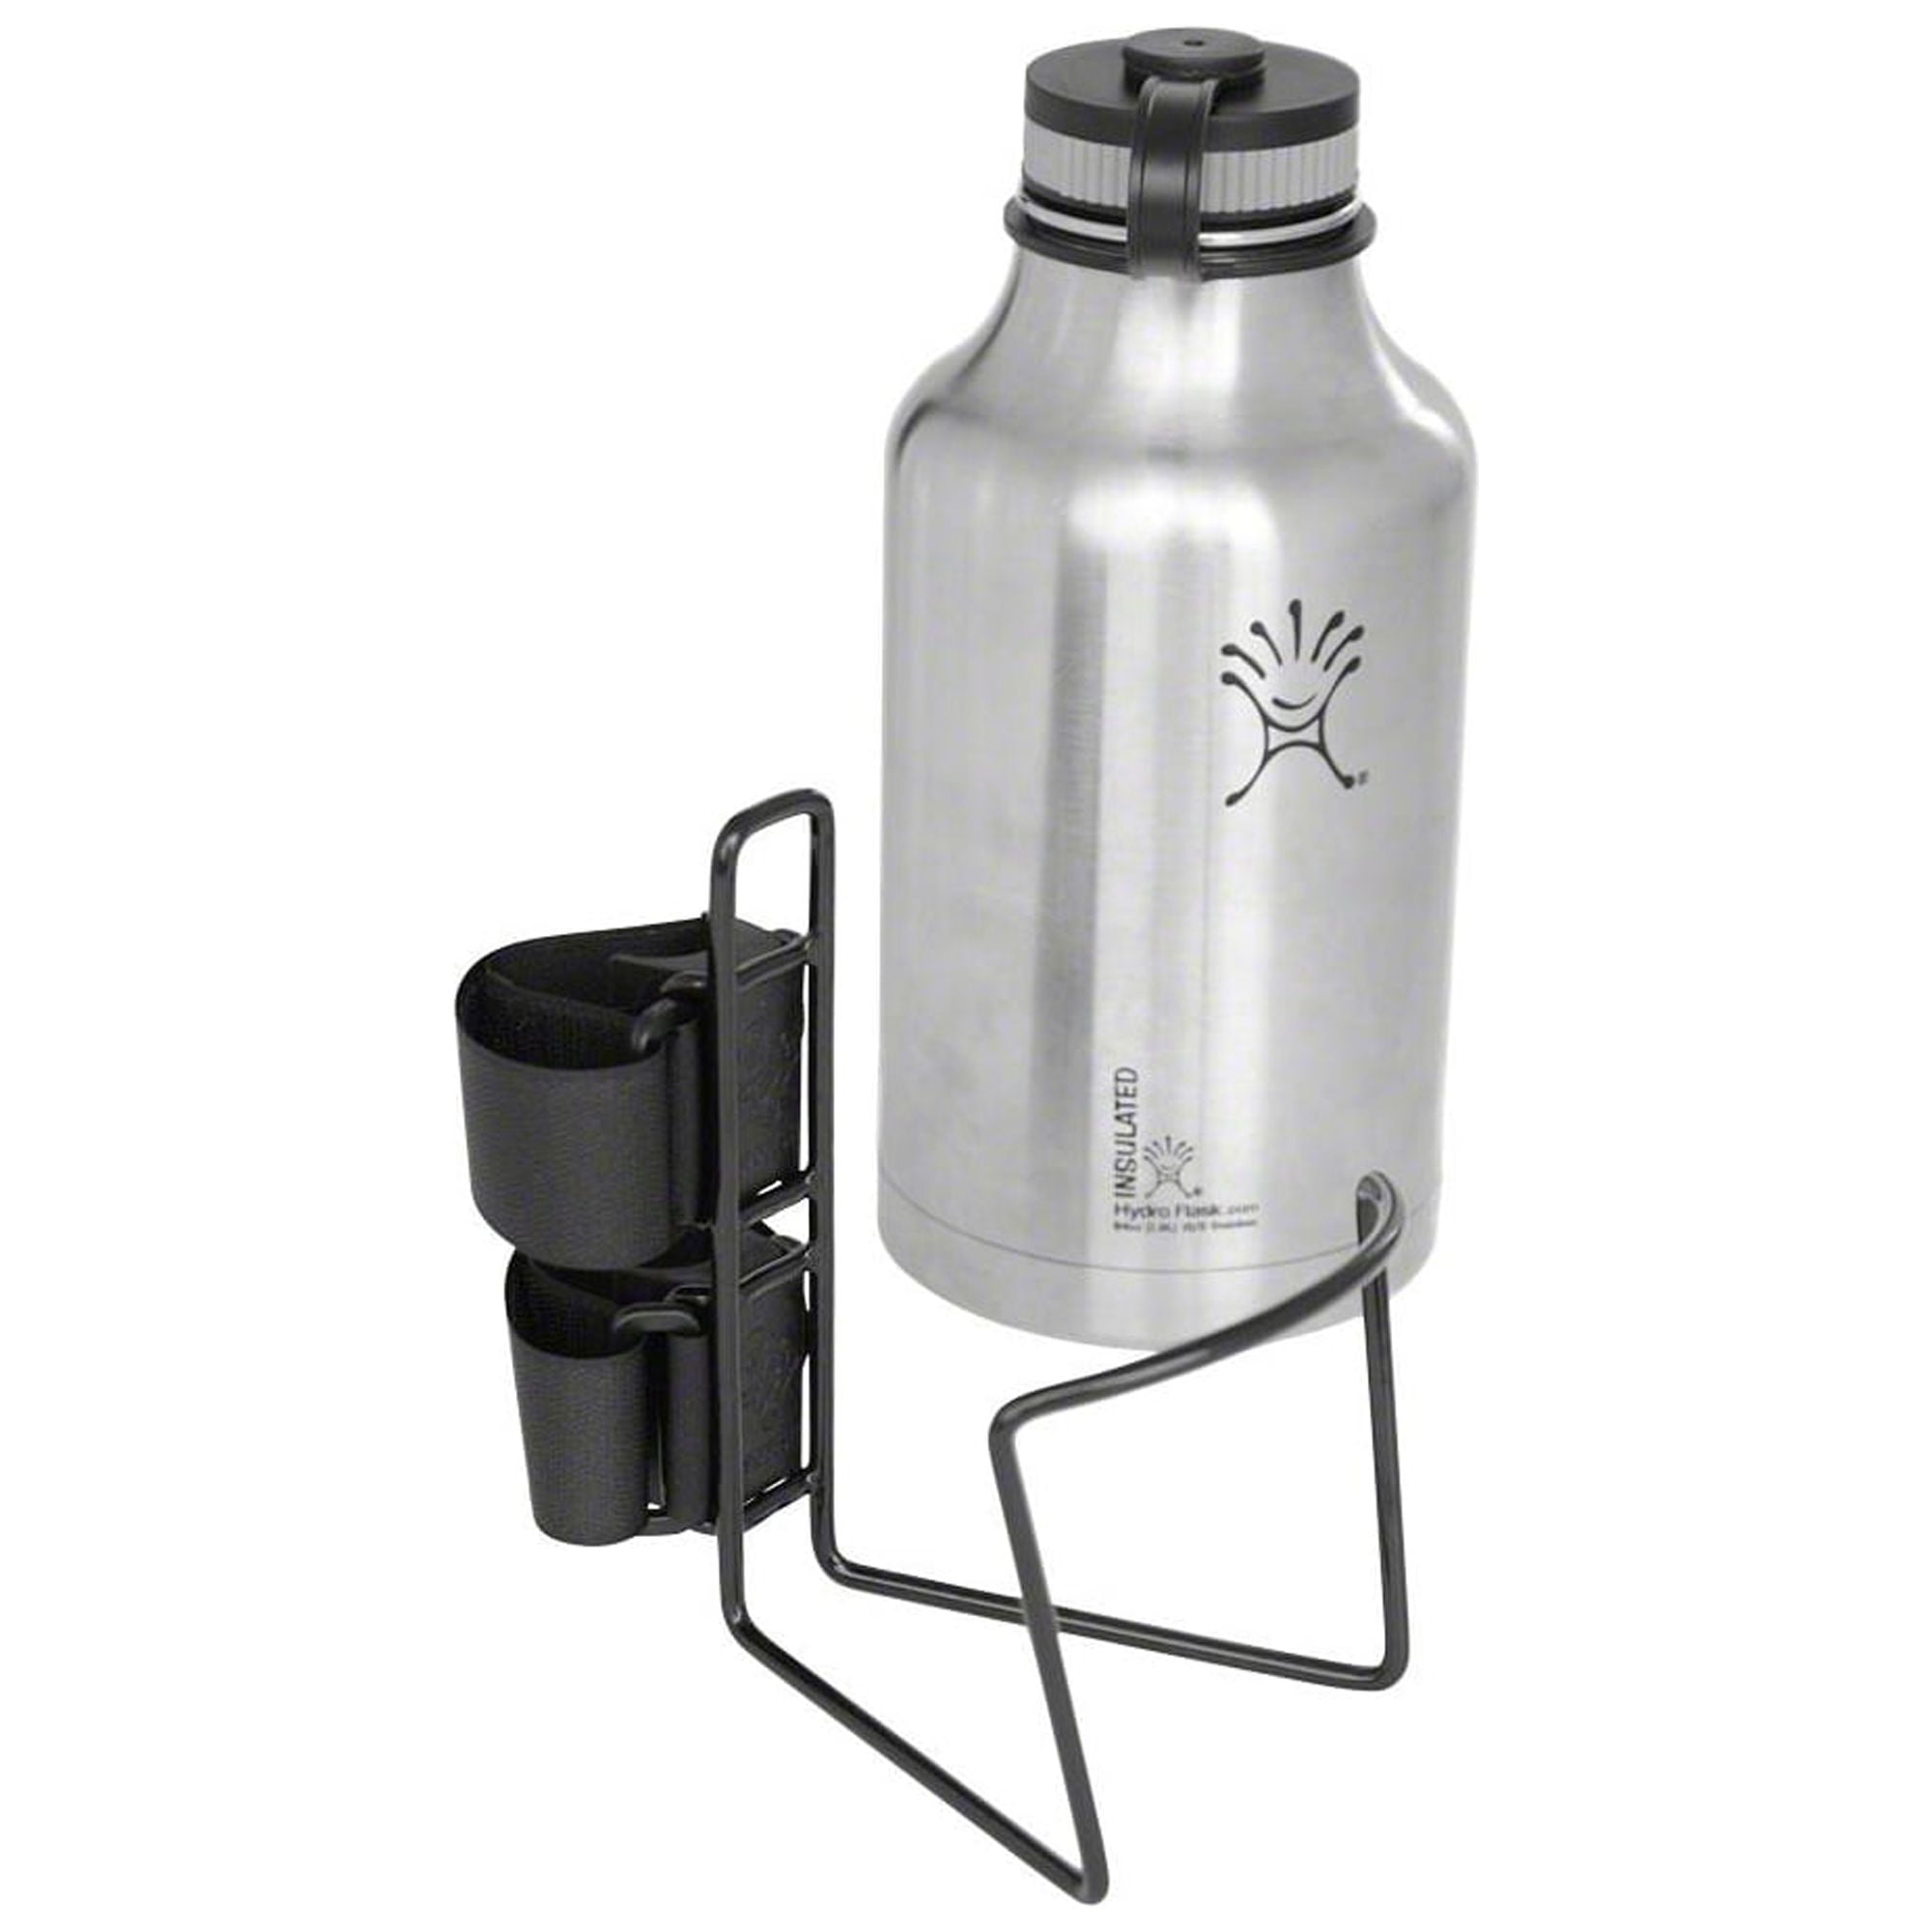 These Large Bike Water Bottles Let You Carry 64+ Ounces in Your Cages